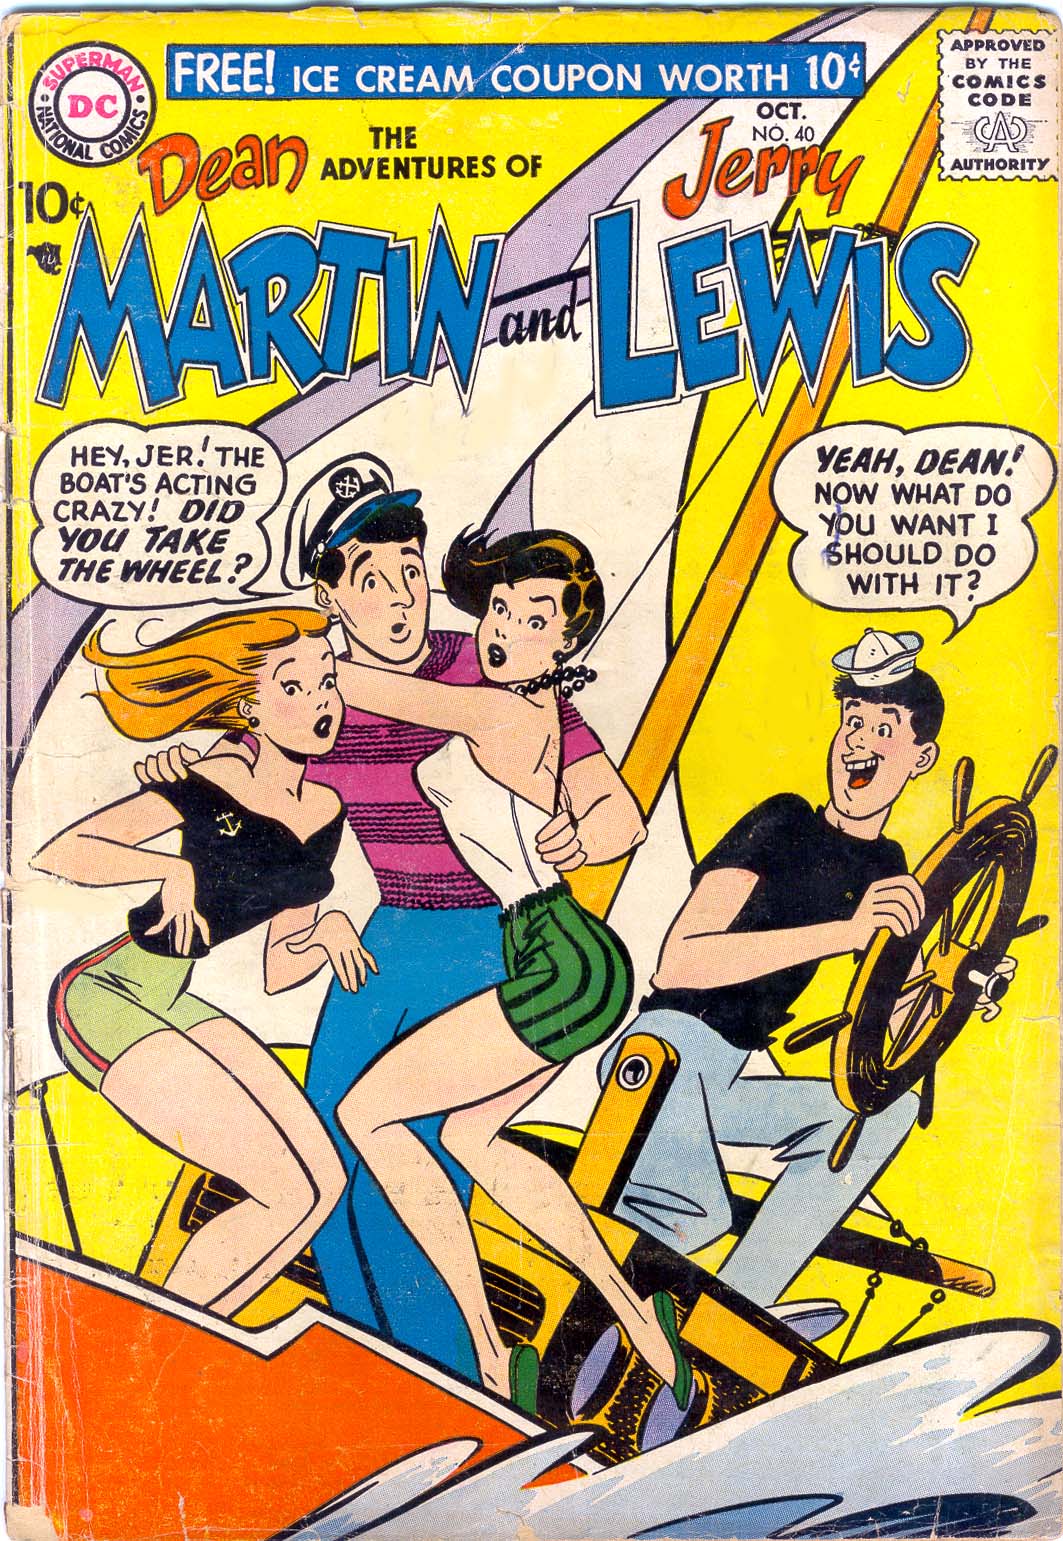 Read online The Adventures of Dean Martin and Jerry Lewis comic -  Issue #40 - 1